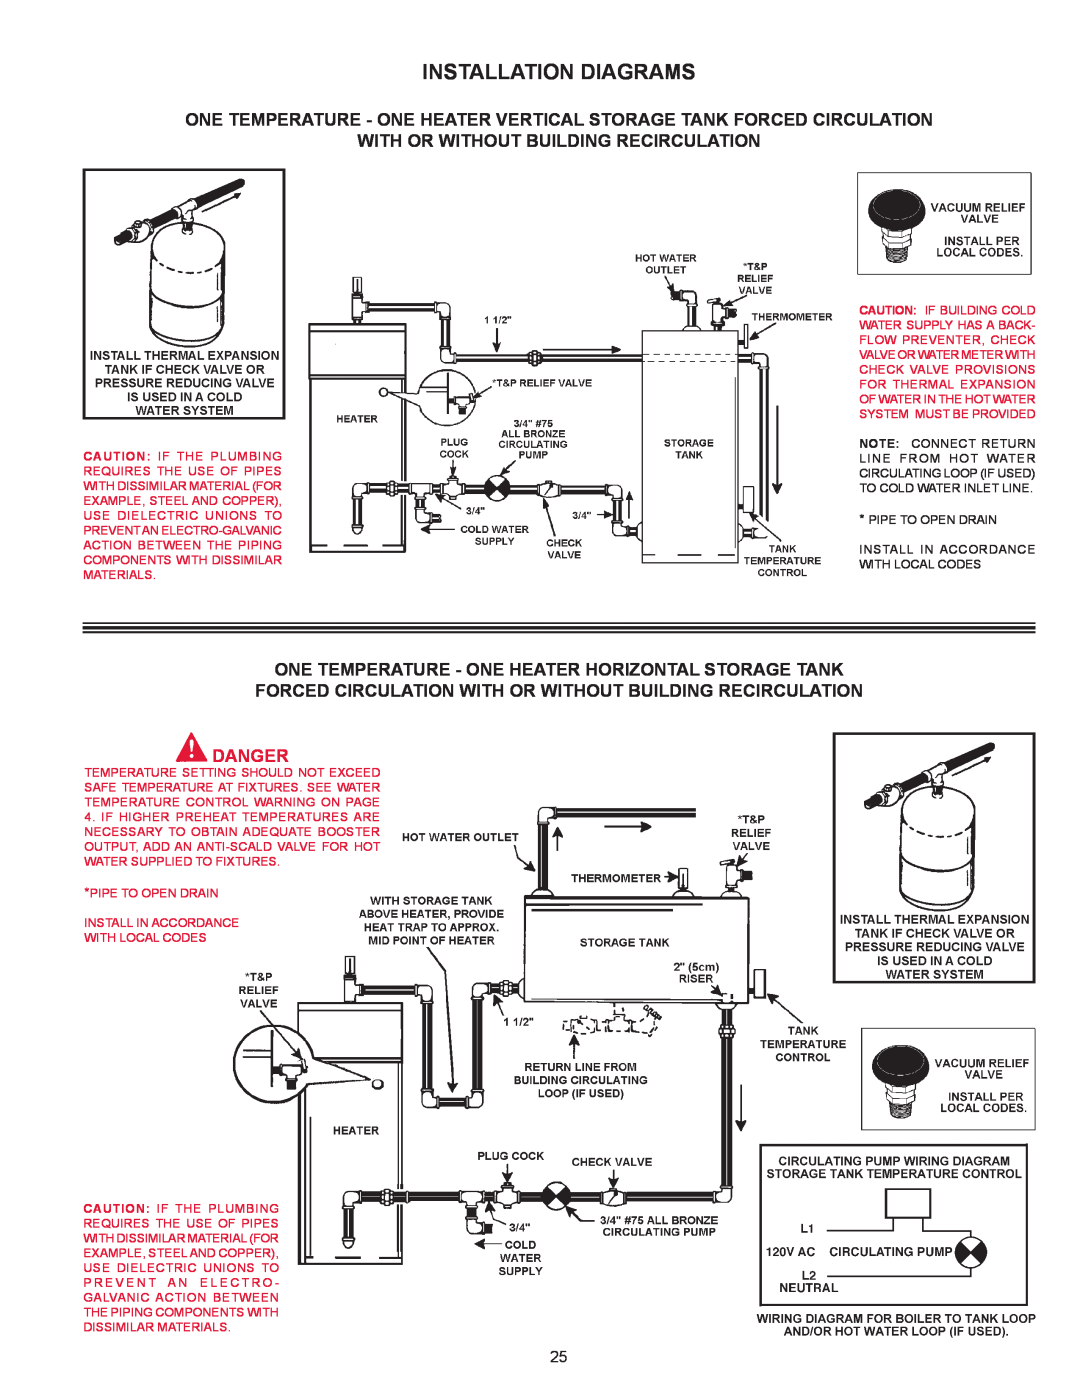 Reliance Water Heaters RUF 100 199 SERIES 100 warranty Installation Diagrams, With Or Without Building Recirculation 